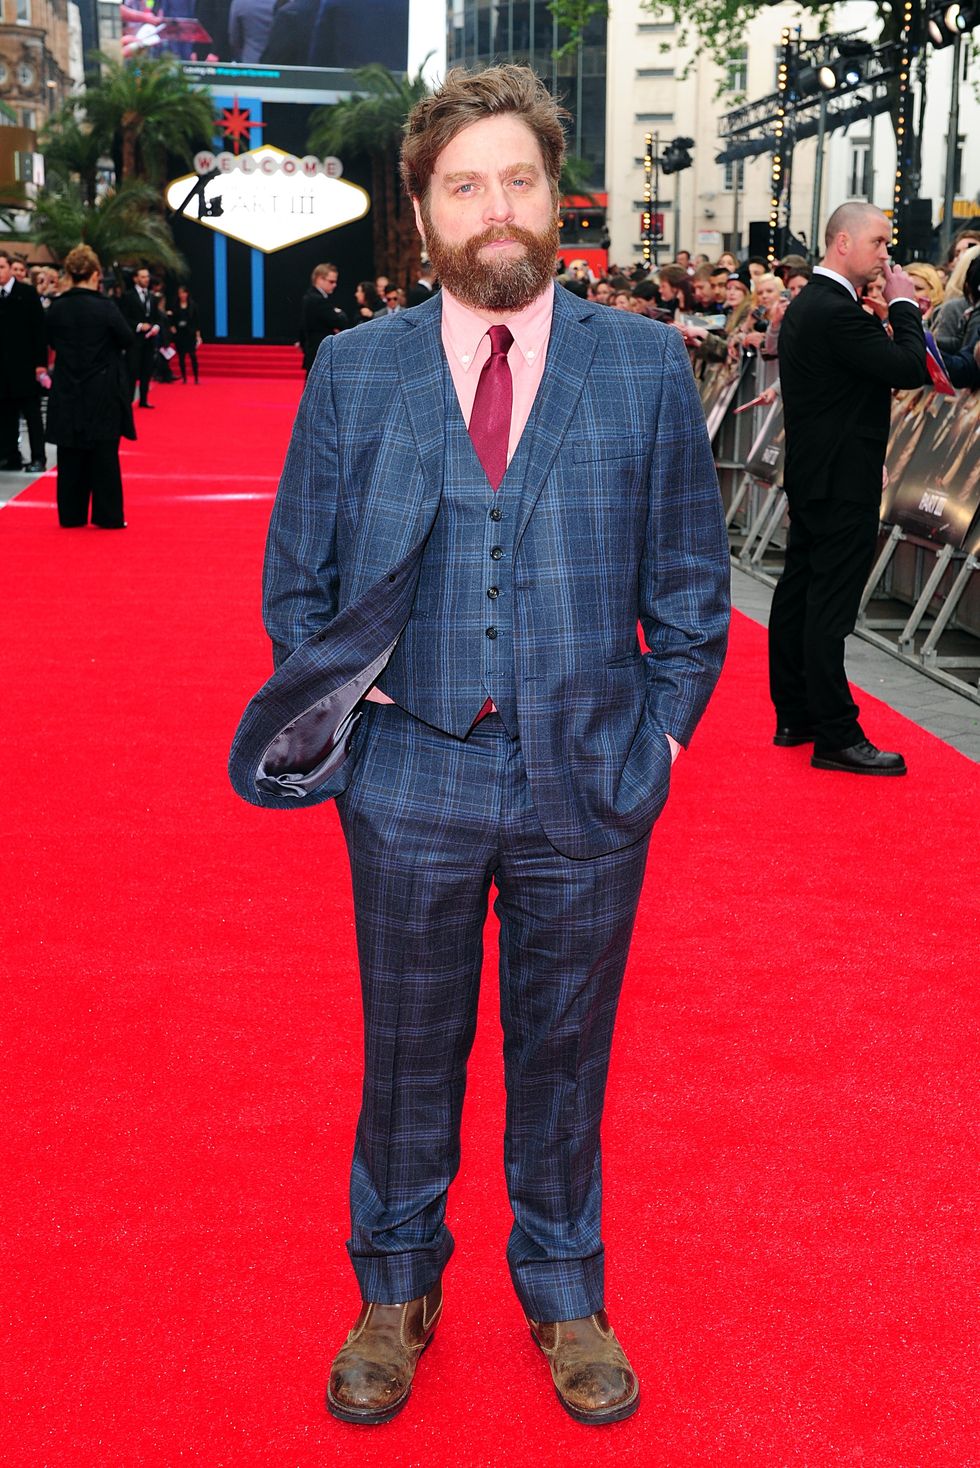 Zach Galifianakis at a premiere in Leicester Square, London.